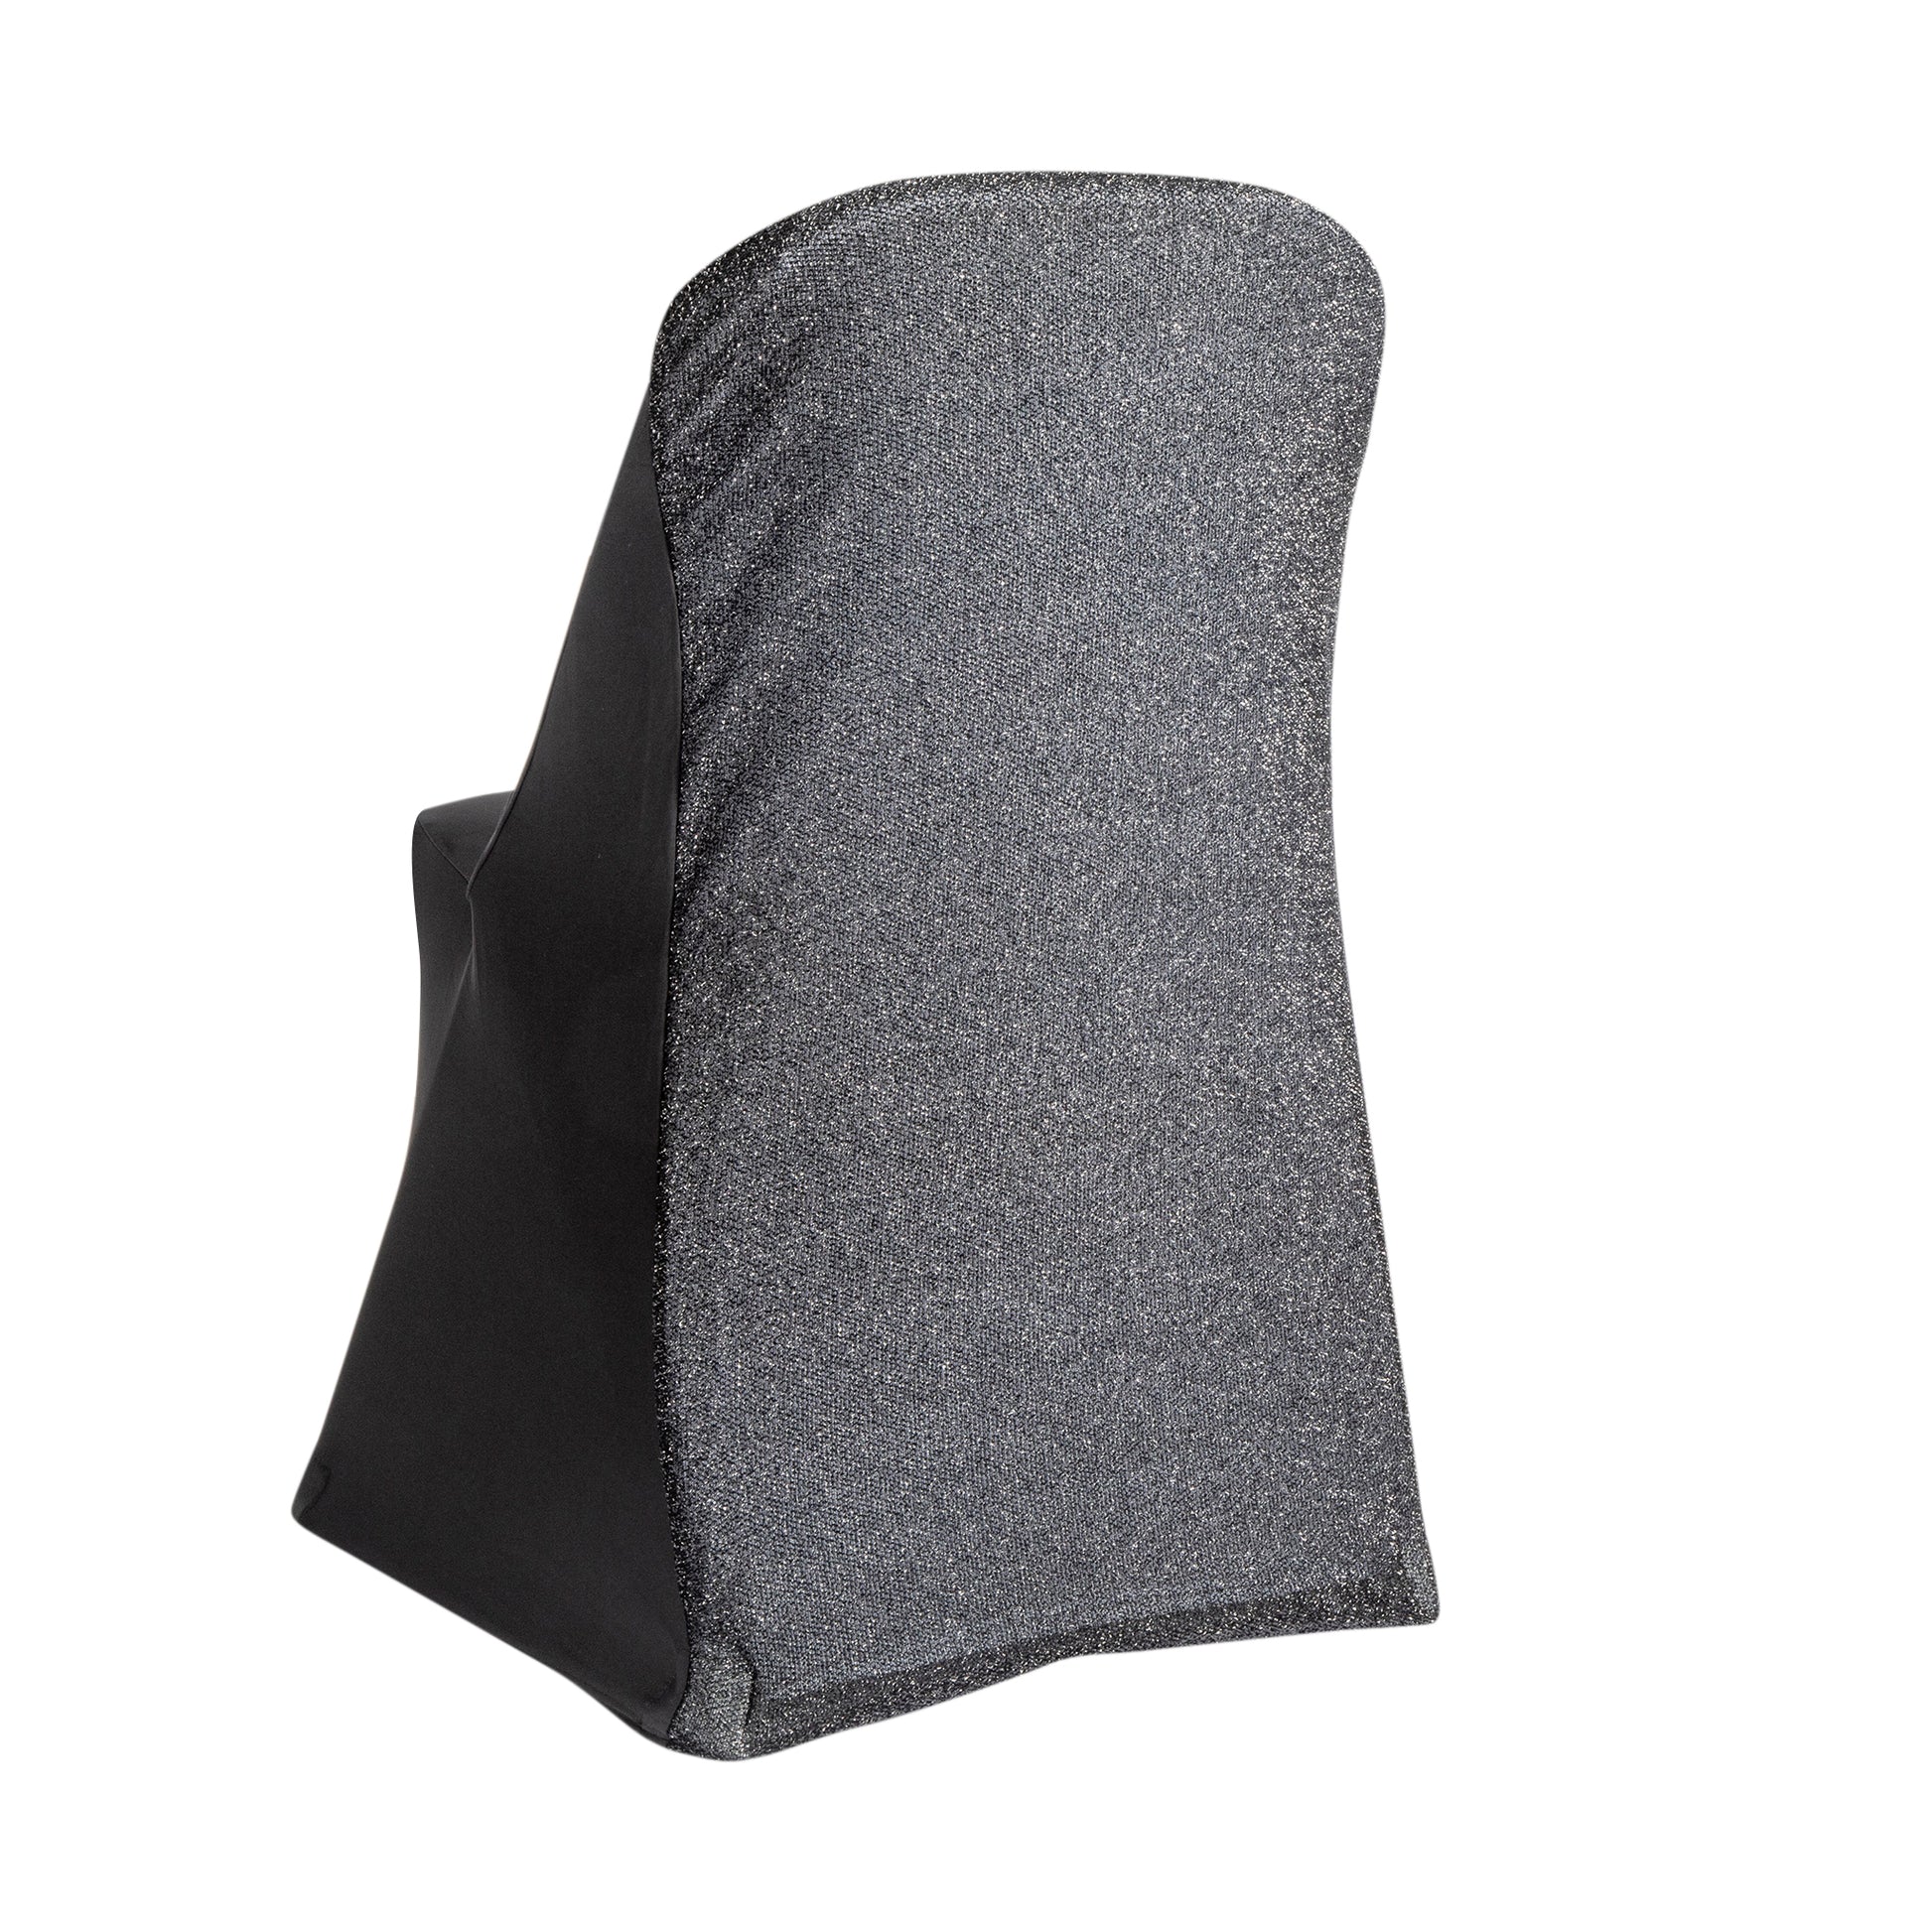 Shimmer Tinsel Folding Spandex Chair Cover - Black